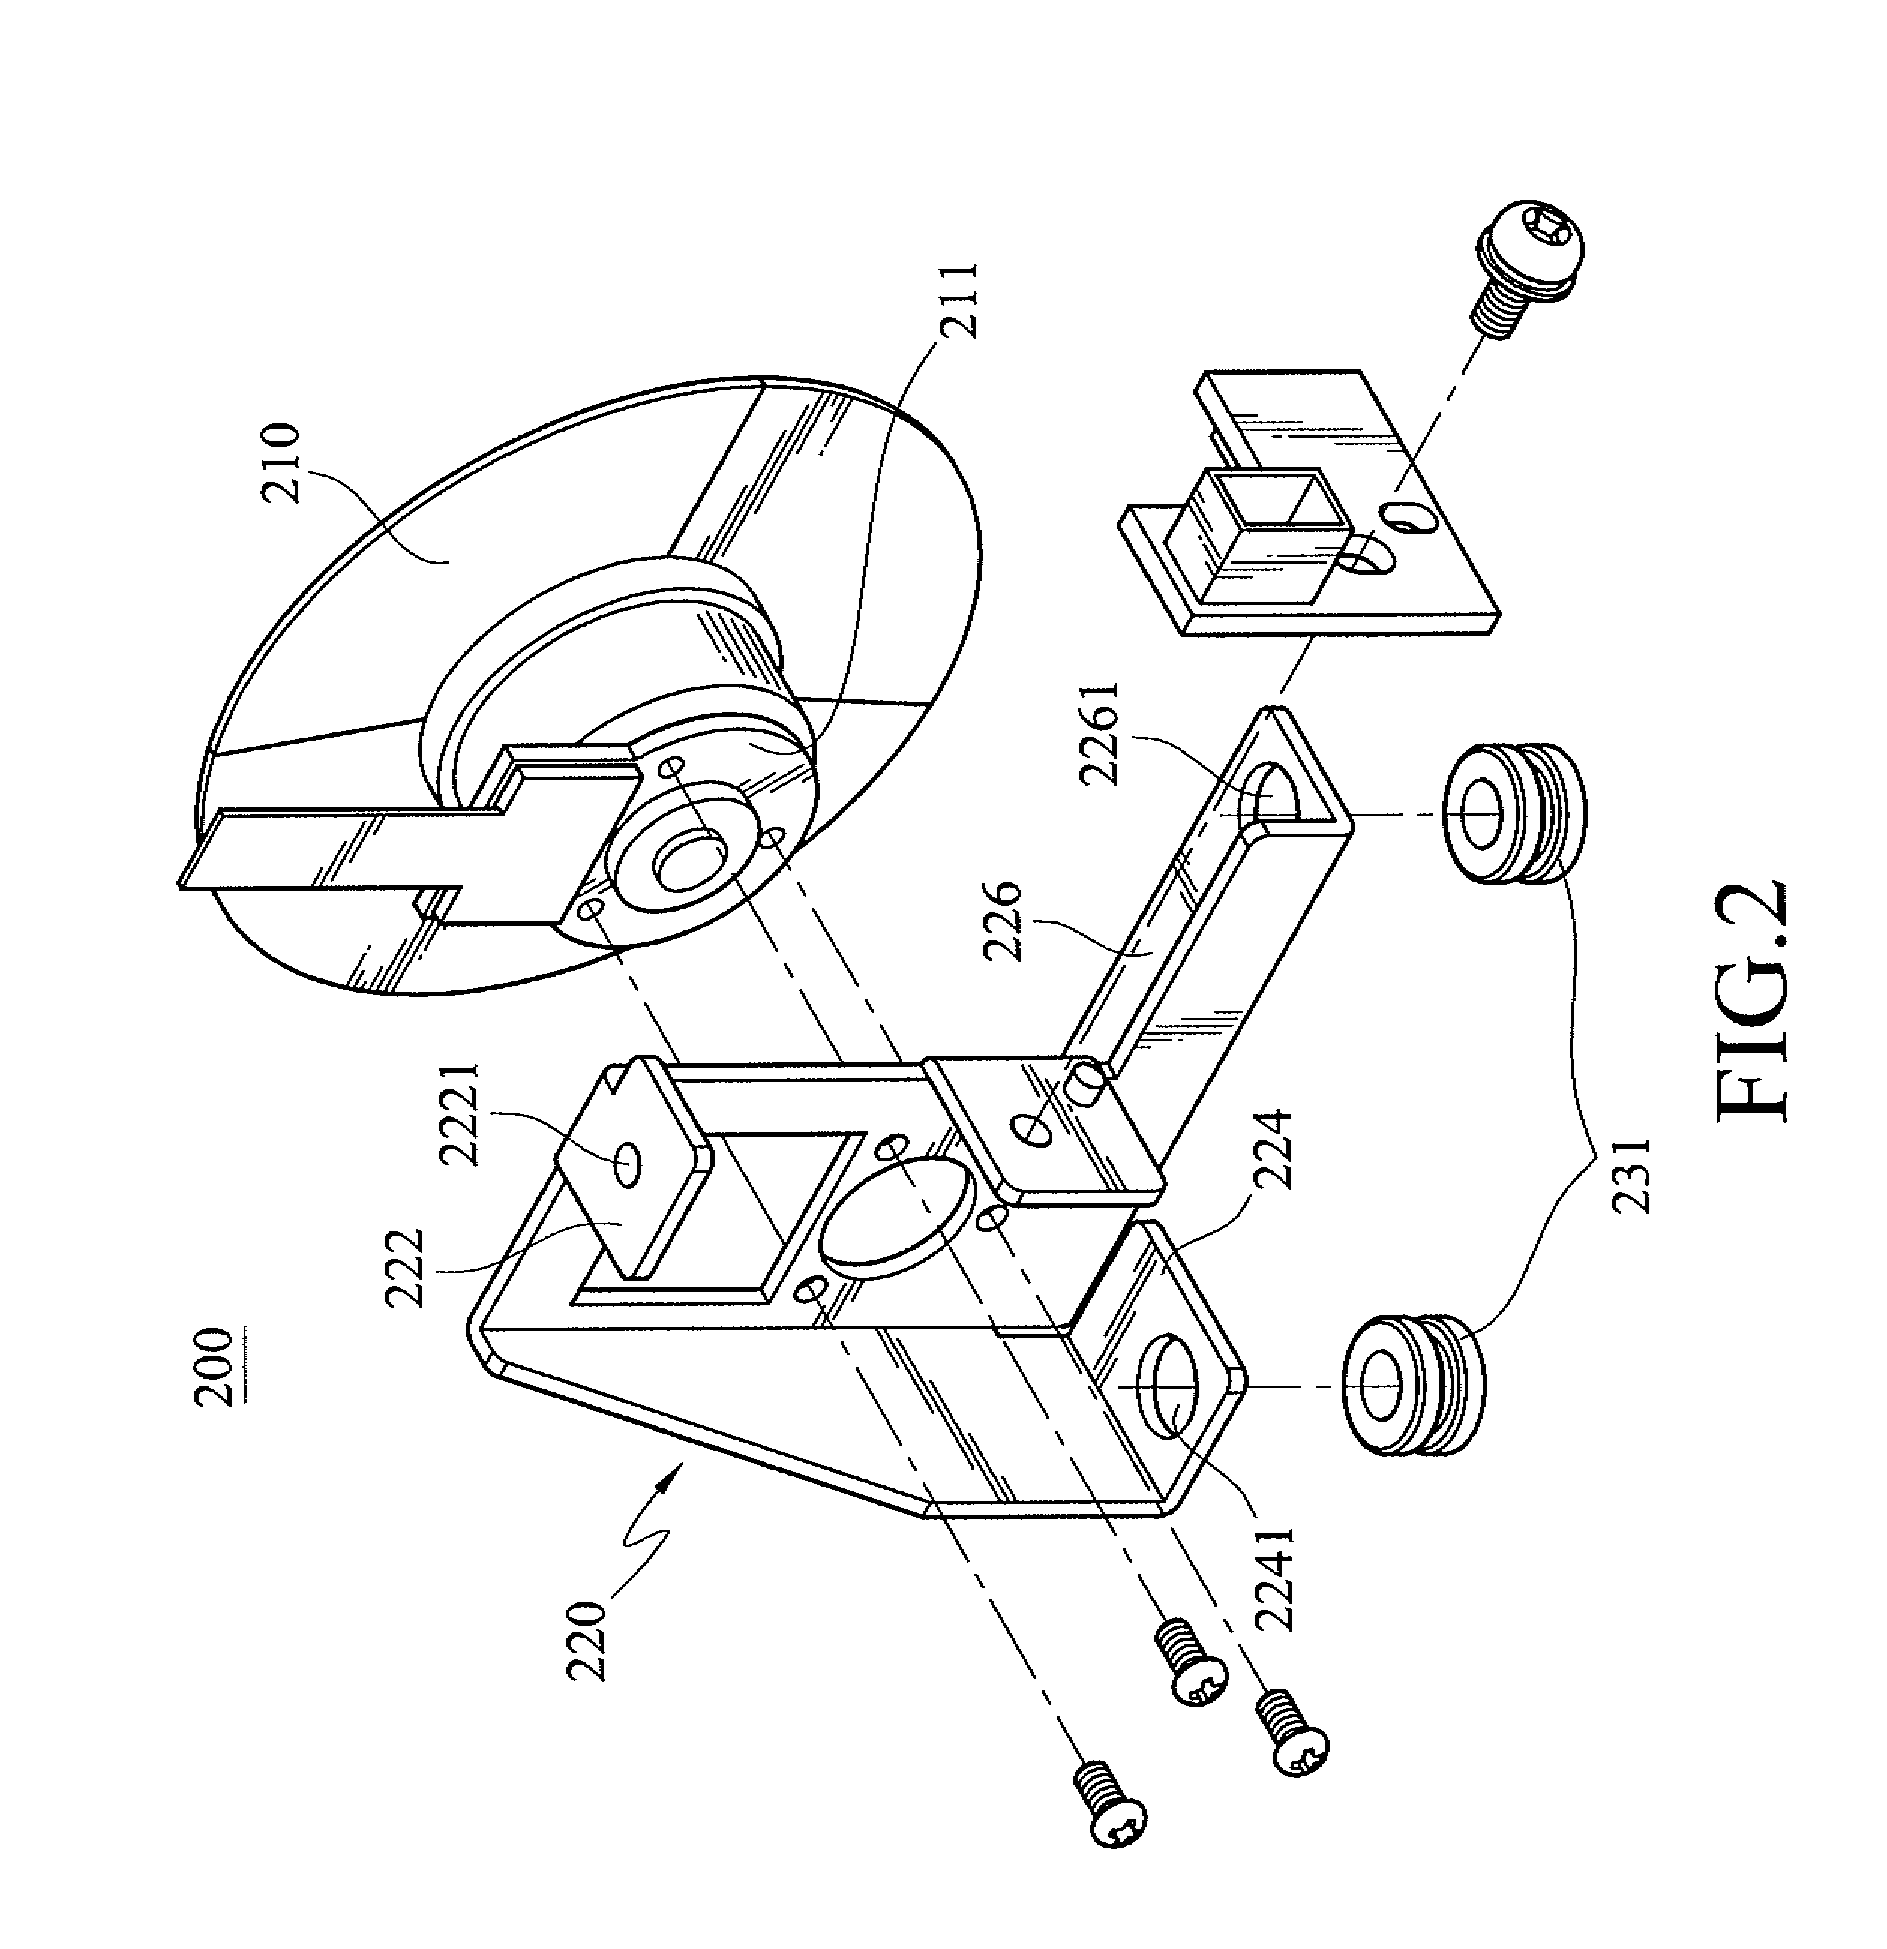 Color wheel module for use in an optical engine and said optical engine